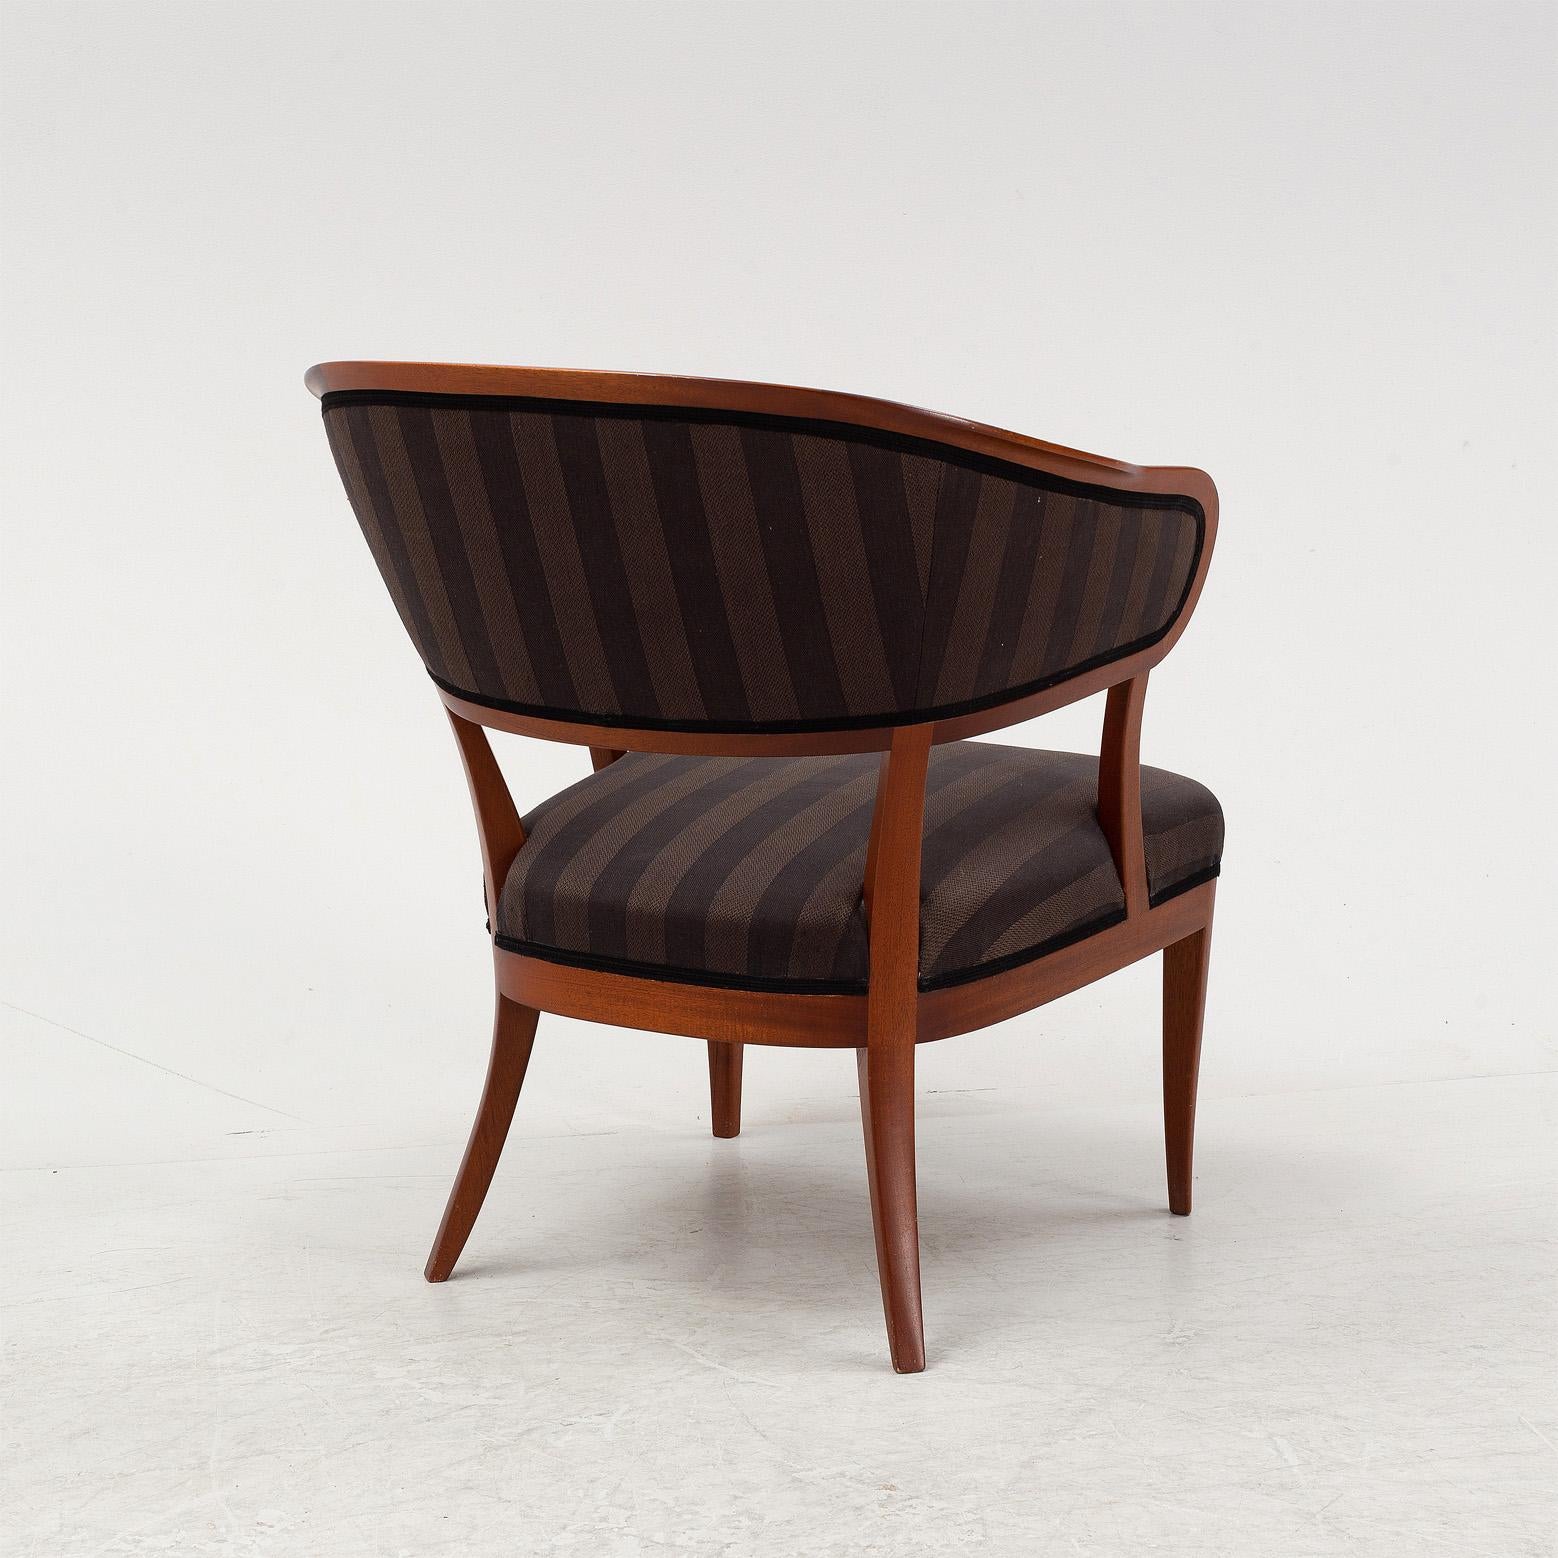 Carl Malmsten is one of Sweden's most famous furniture designers. Many of his furniture are considered modern design classics, for example, the cane chair 